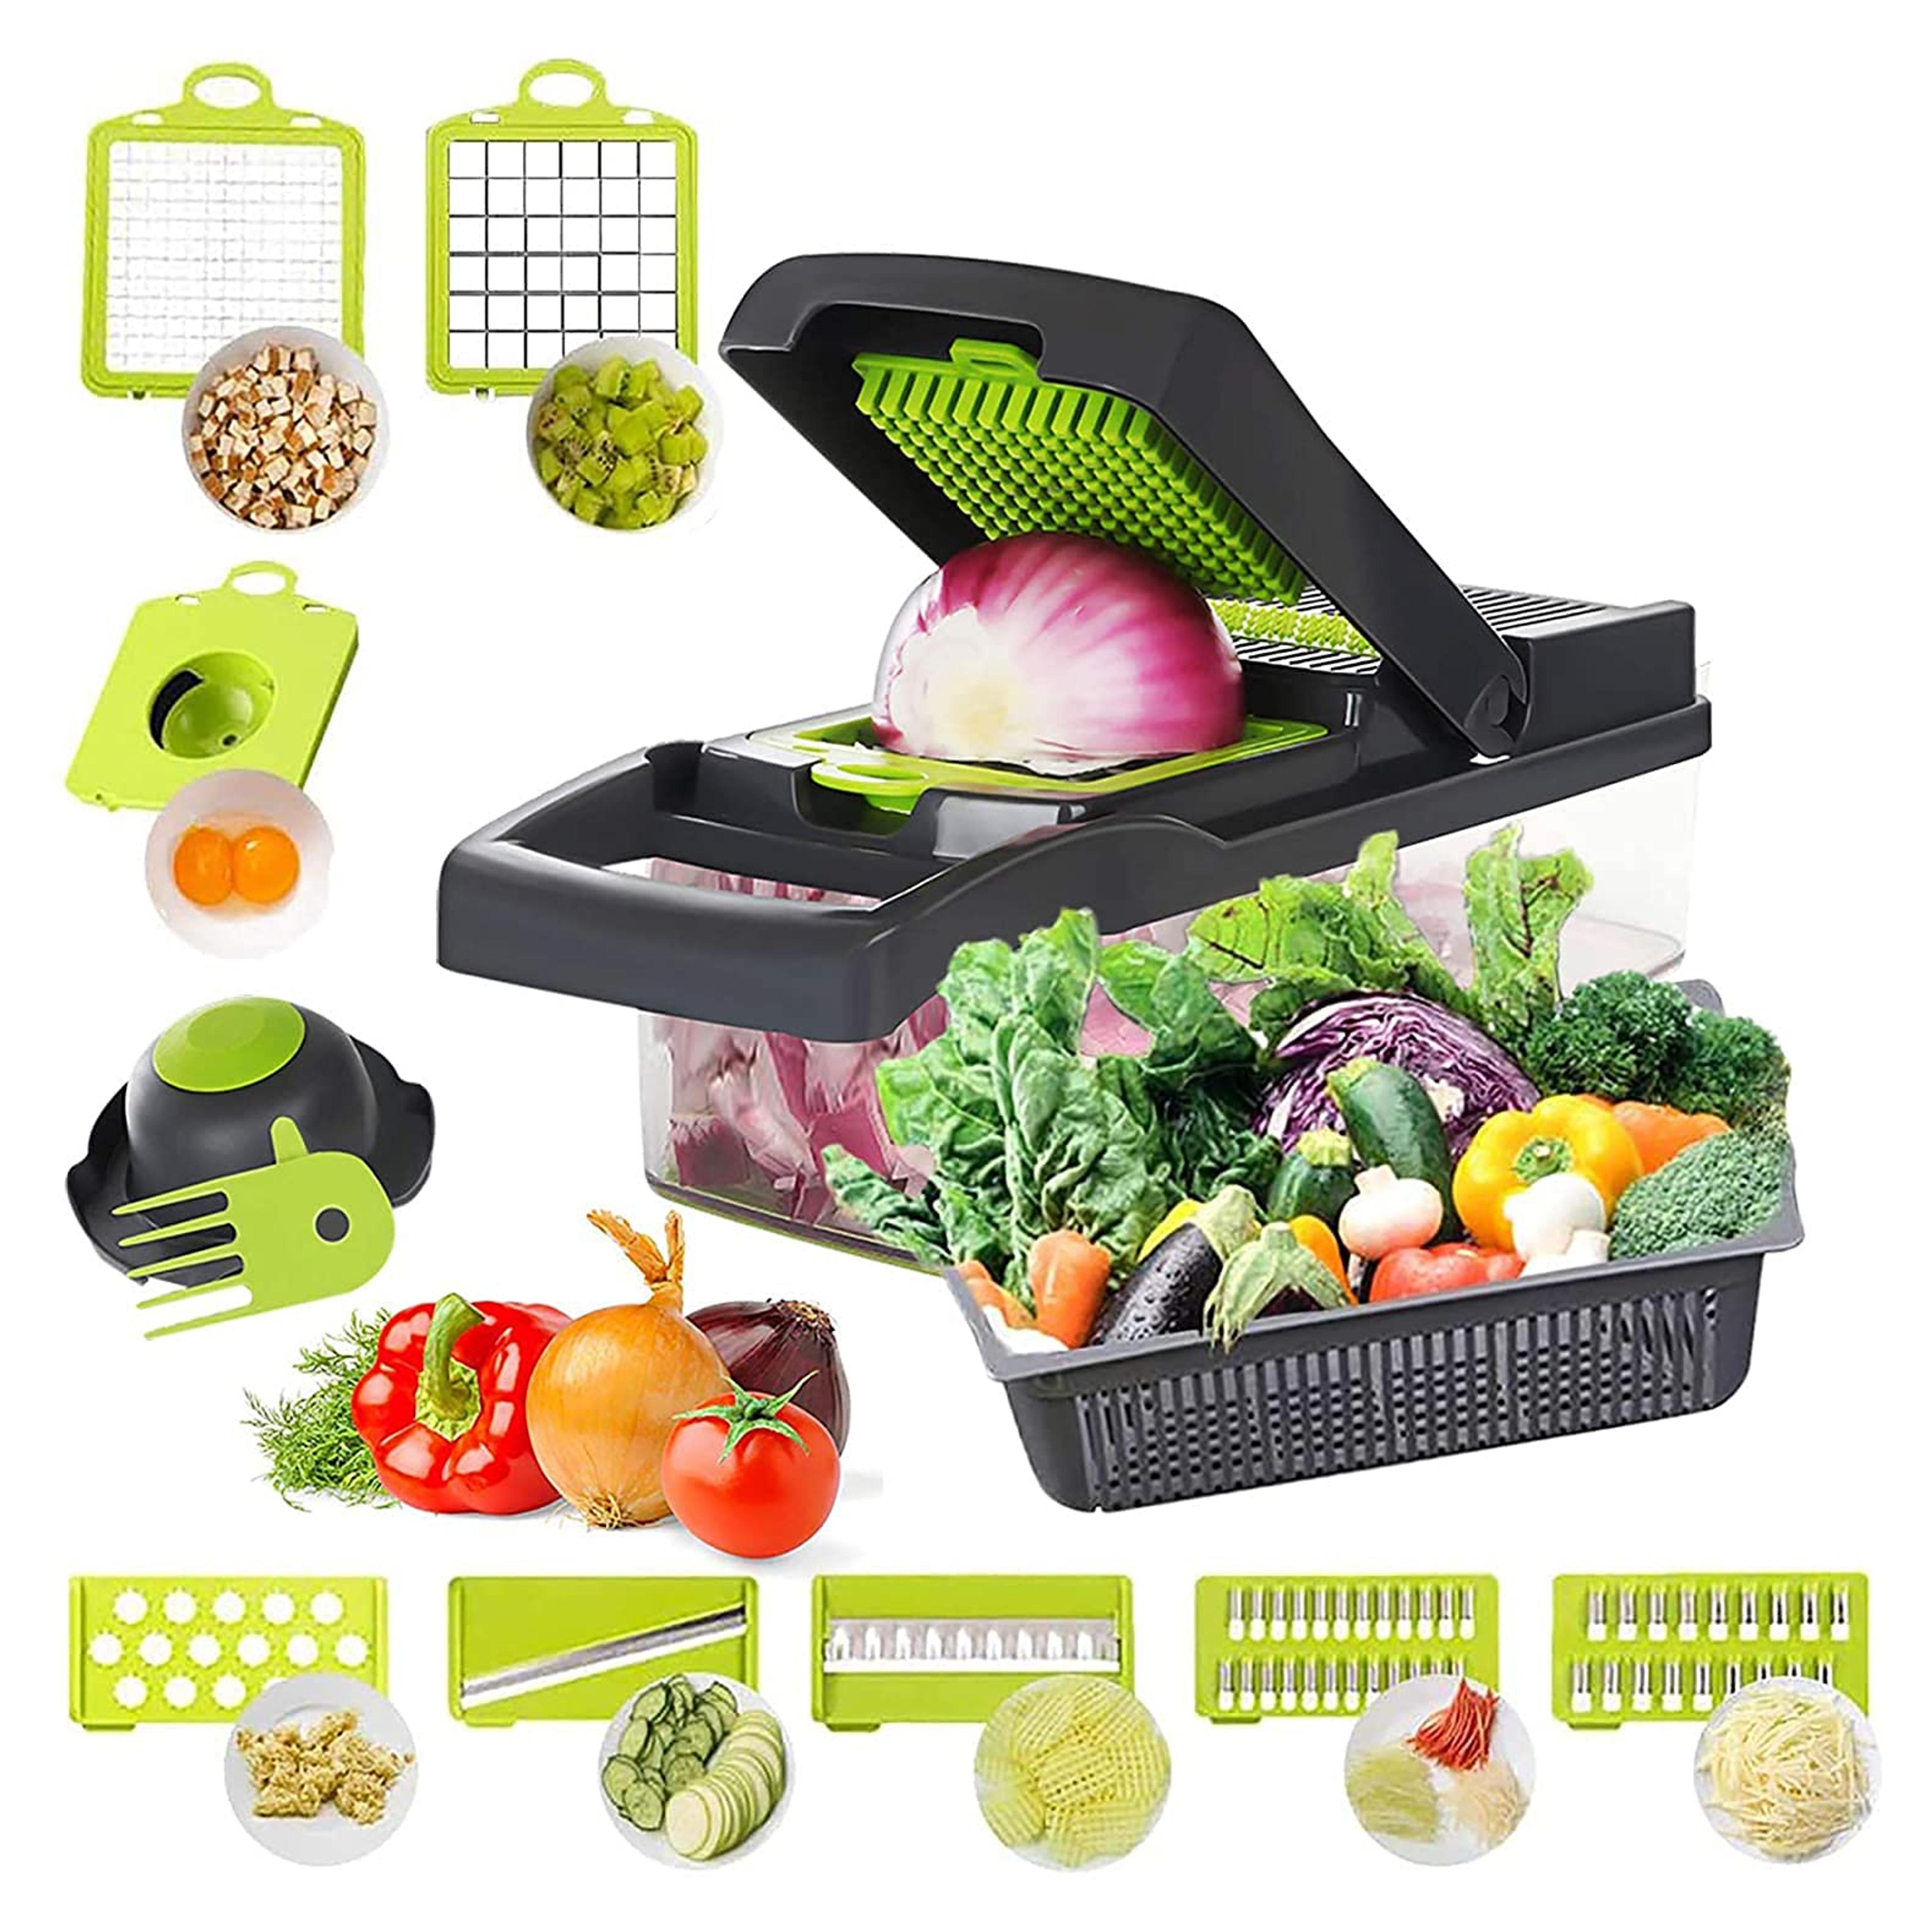 PIONEO 12 in 1 Vegetable Chopper, Multifunctional Mandoline Slicer Dicer Household Kitchen Manual Julienne Grater Cutter for Onion, Garlic, Carrot, Potato, Tomato, Fruit, Salad (gray-green)